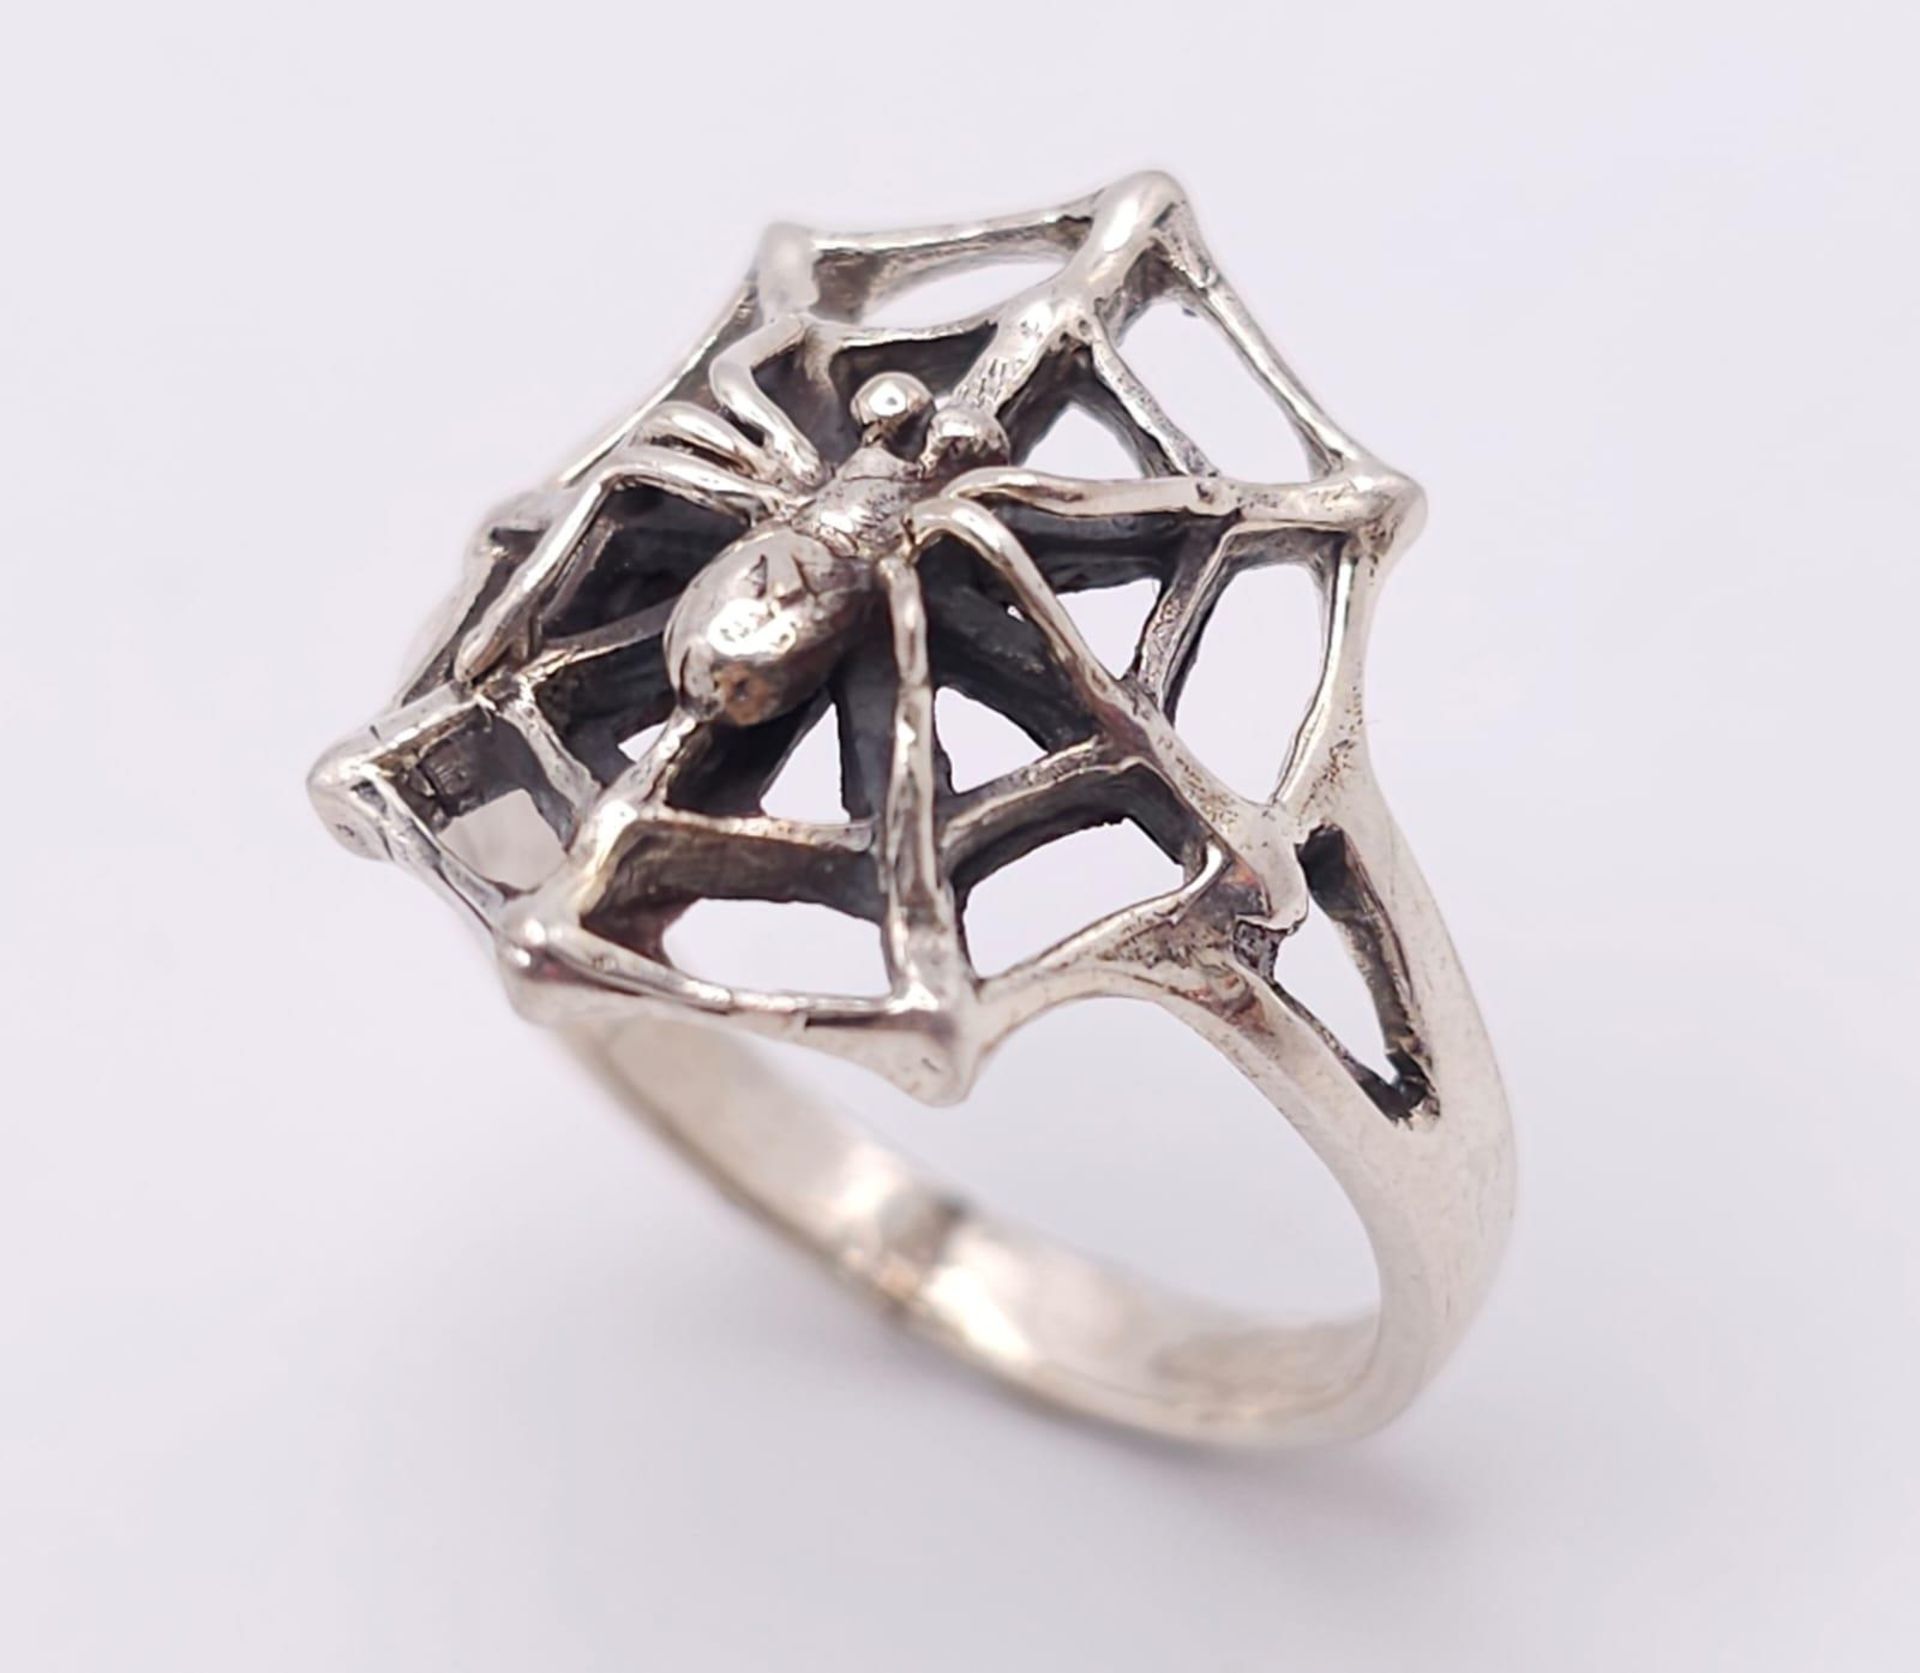 A Unique Vintage Sterling Silver Spider and Spider Web Ring Size Q. The Crown Measures 2cm Long - Image 2 of 9